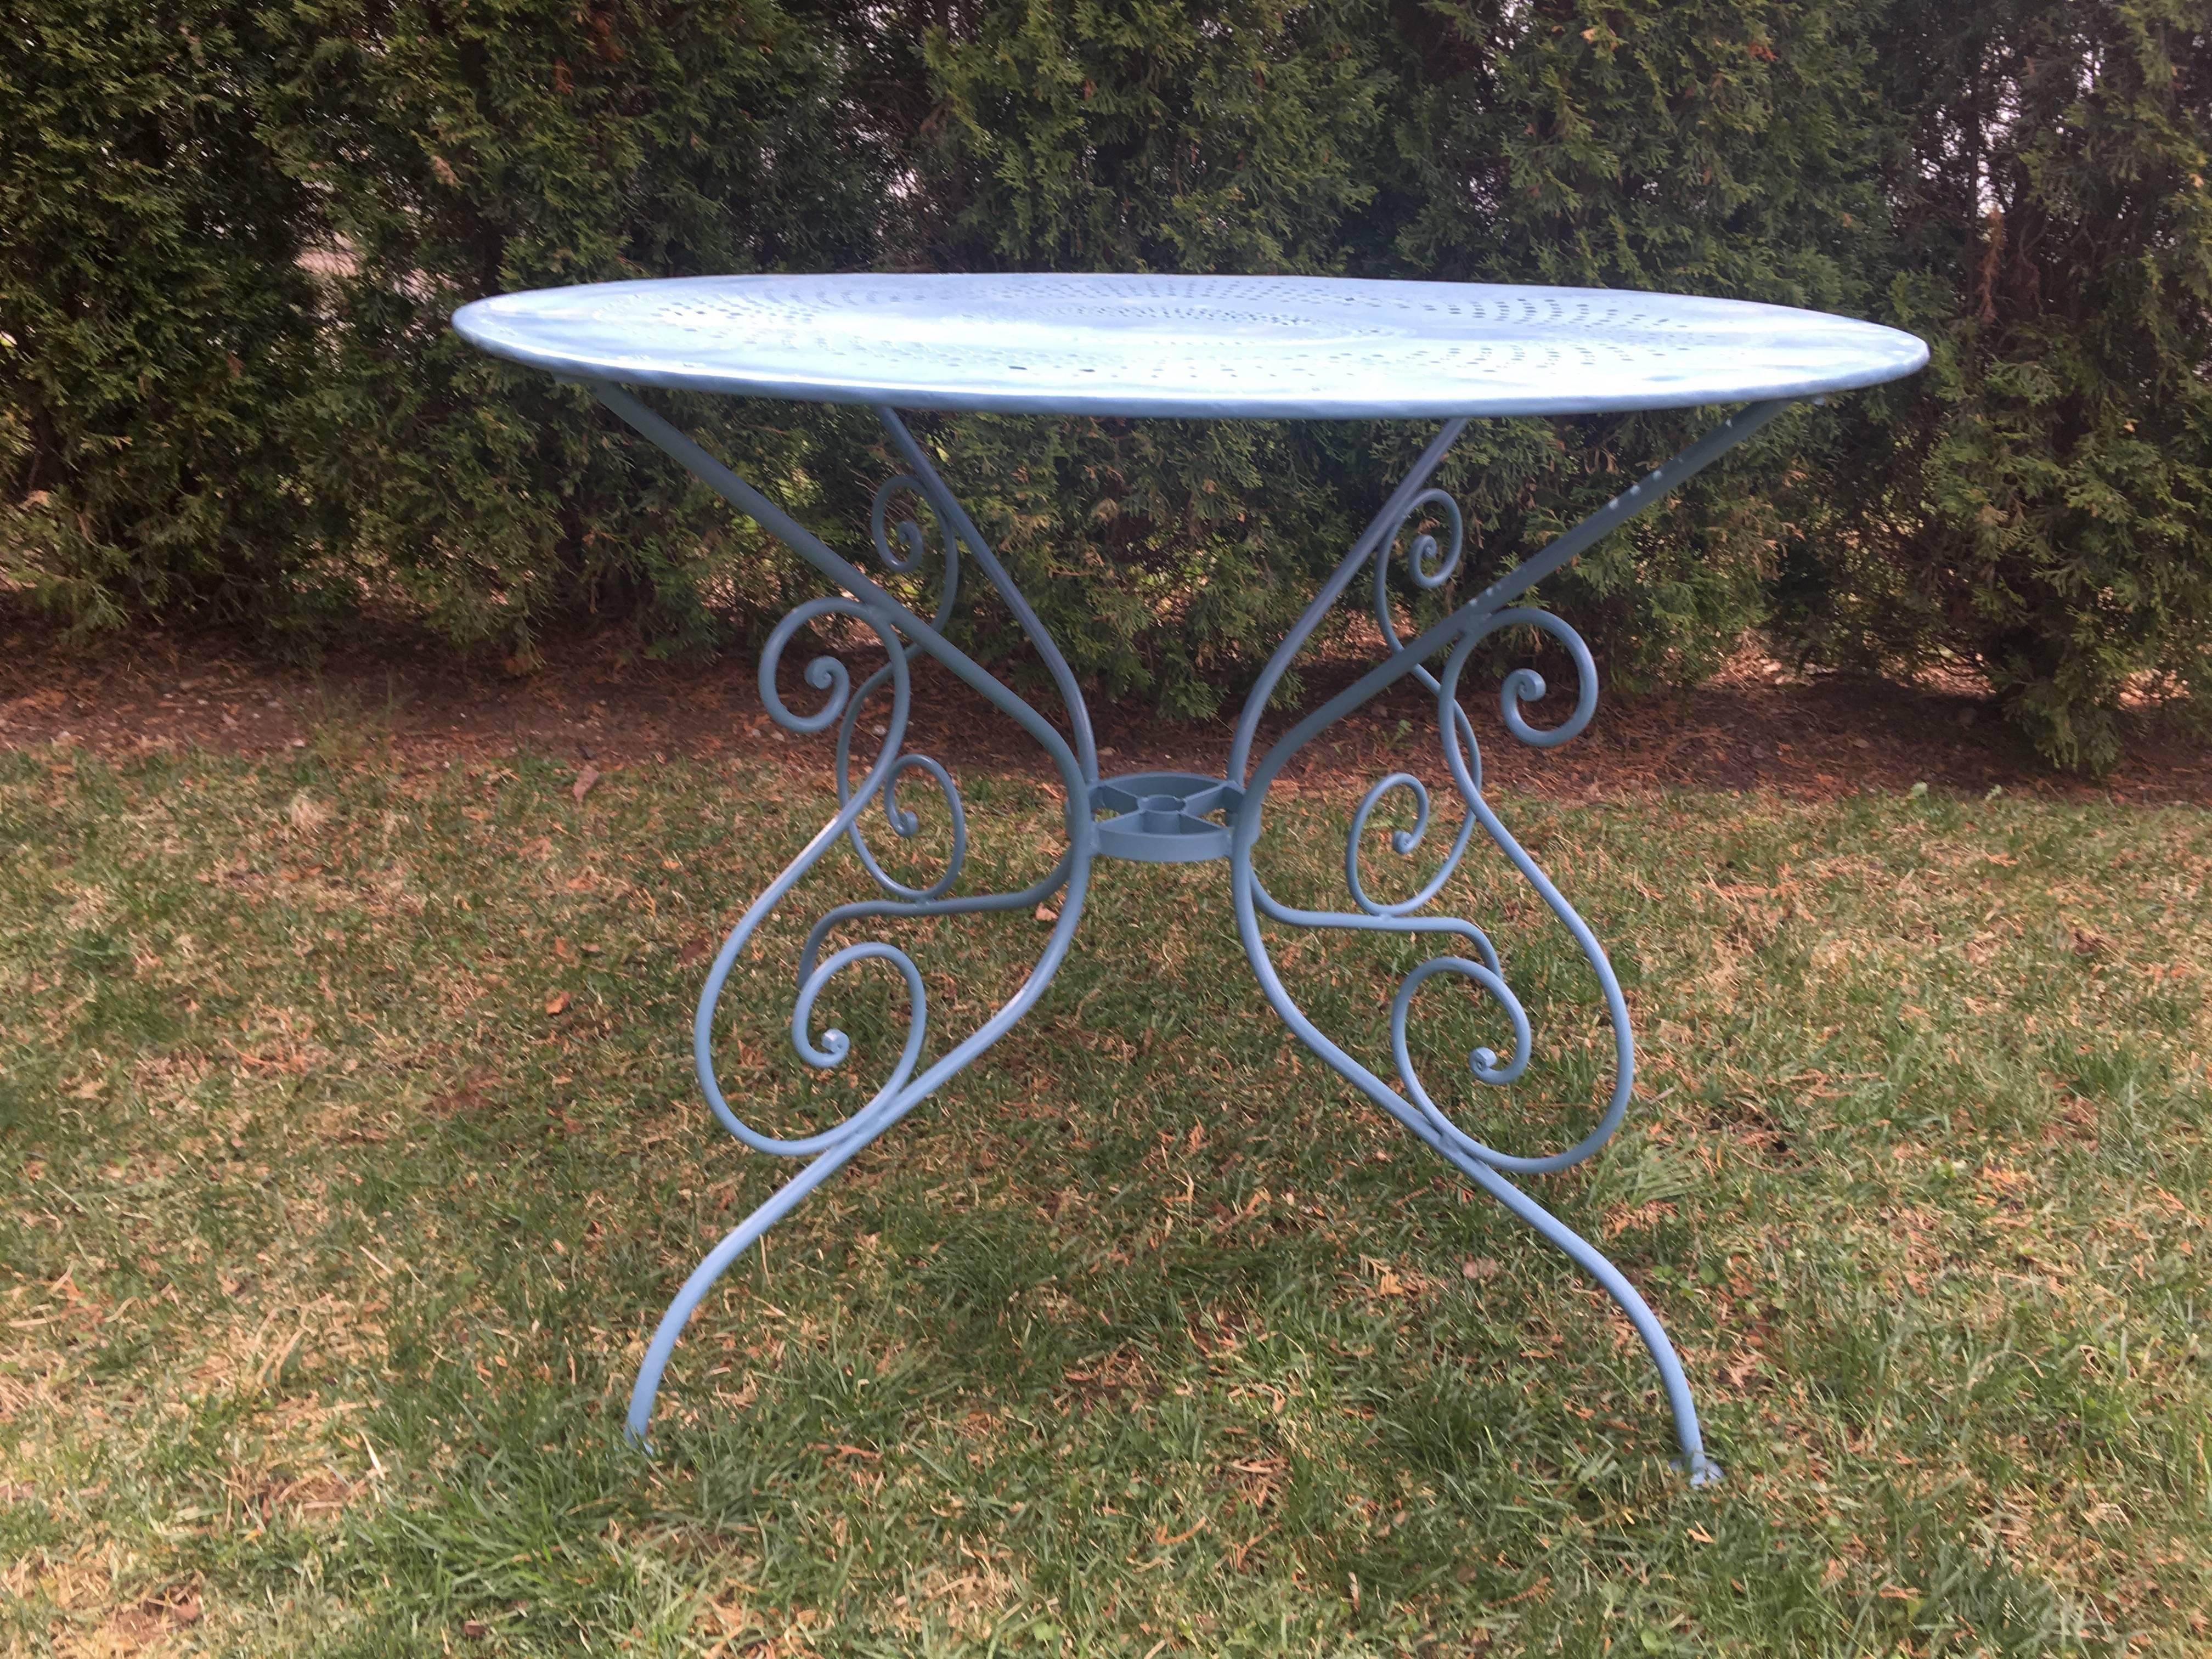 20th Century French Wrought Iron Five Piece Garden Dining Set with Round Table